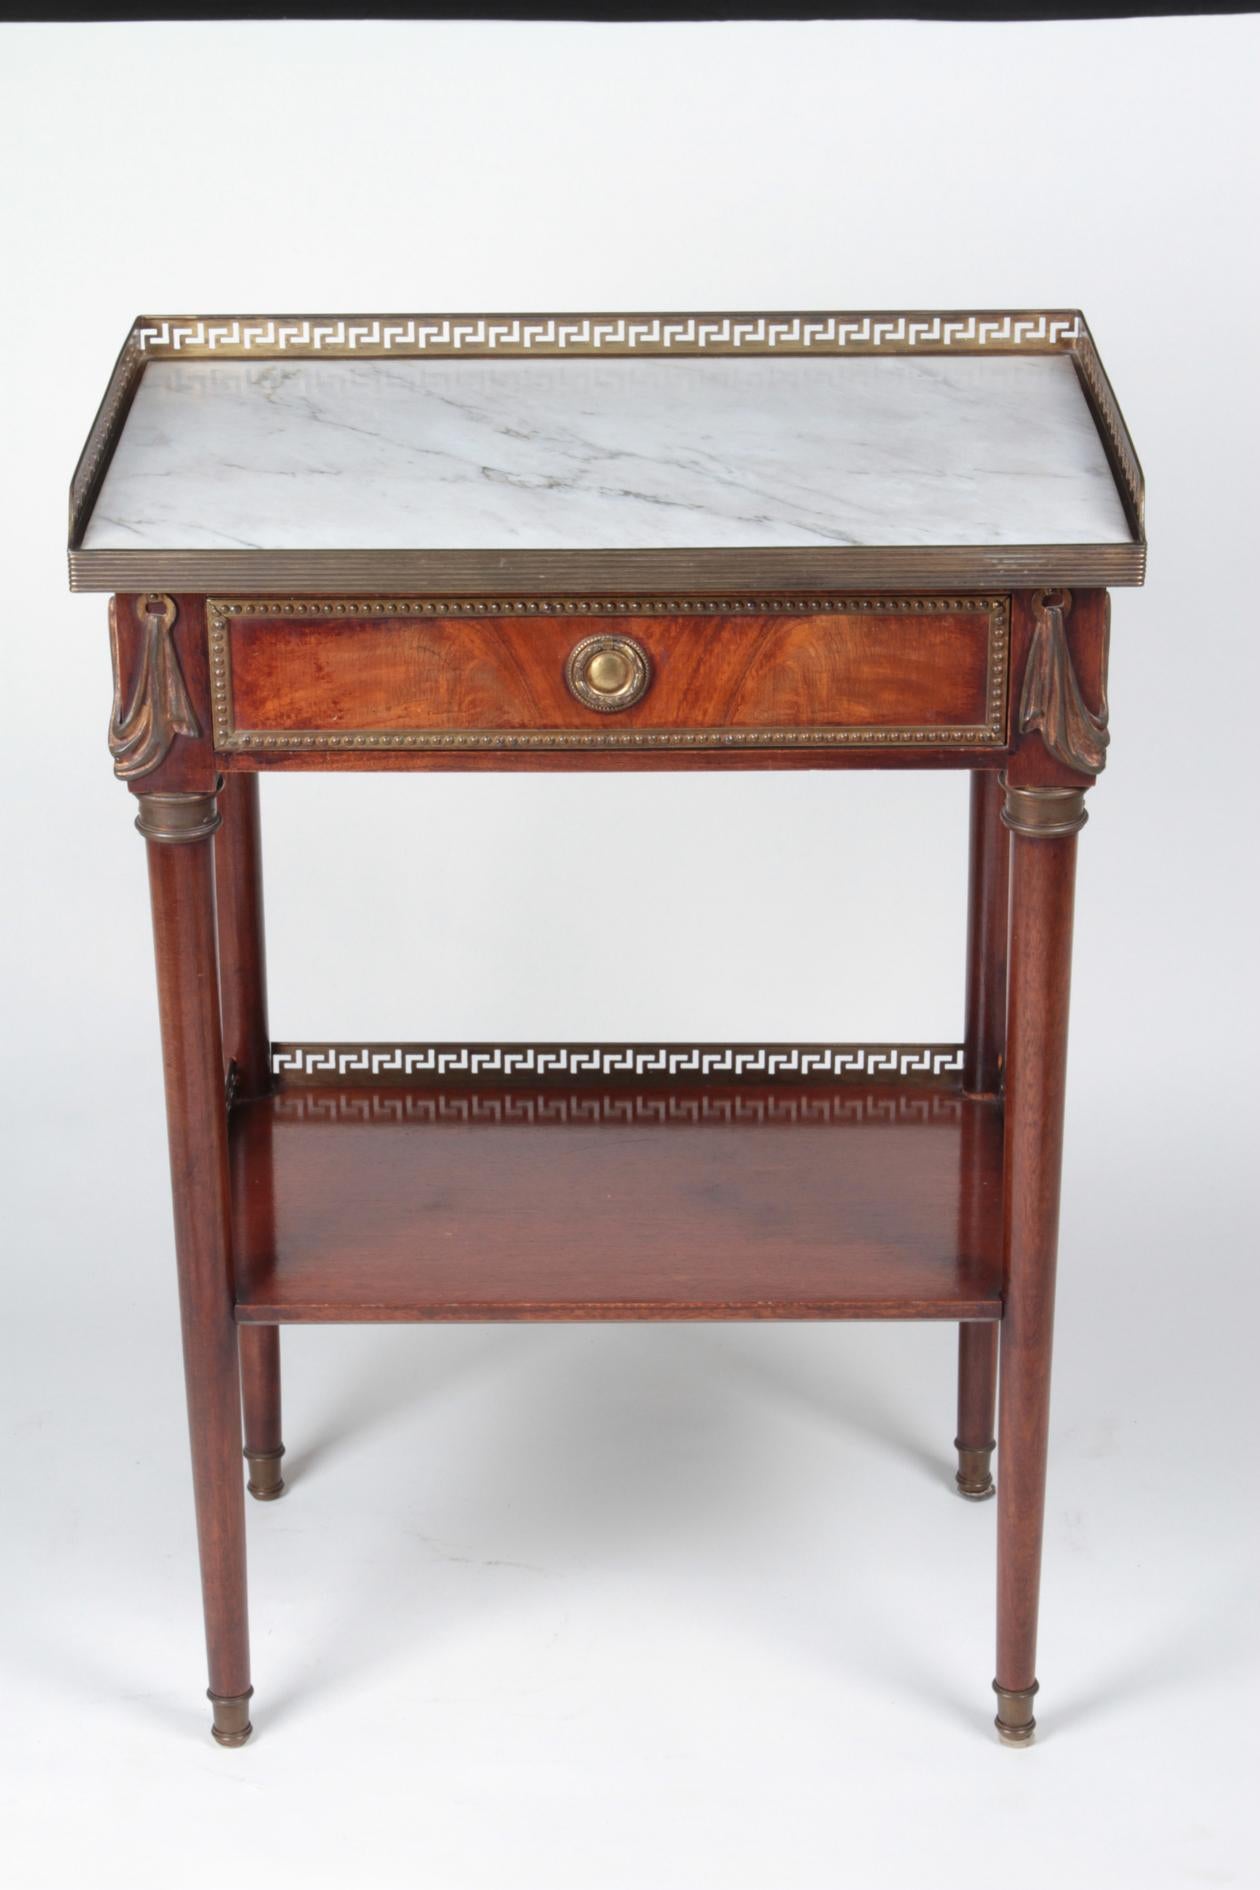 Napoleon III French Coffee Table in Mahogany and White Carrara Marble and Bronze 19th Century